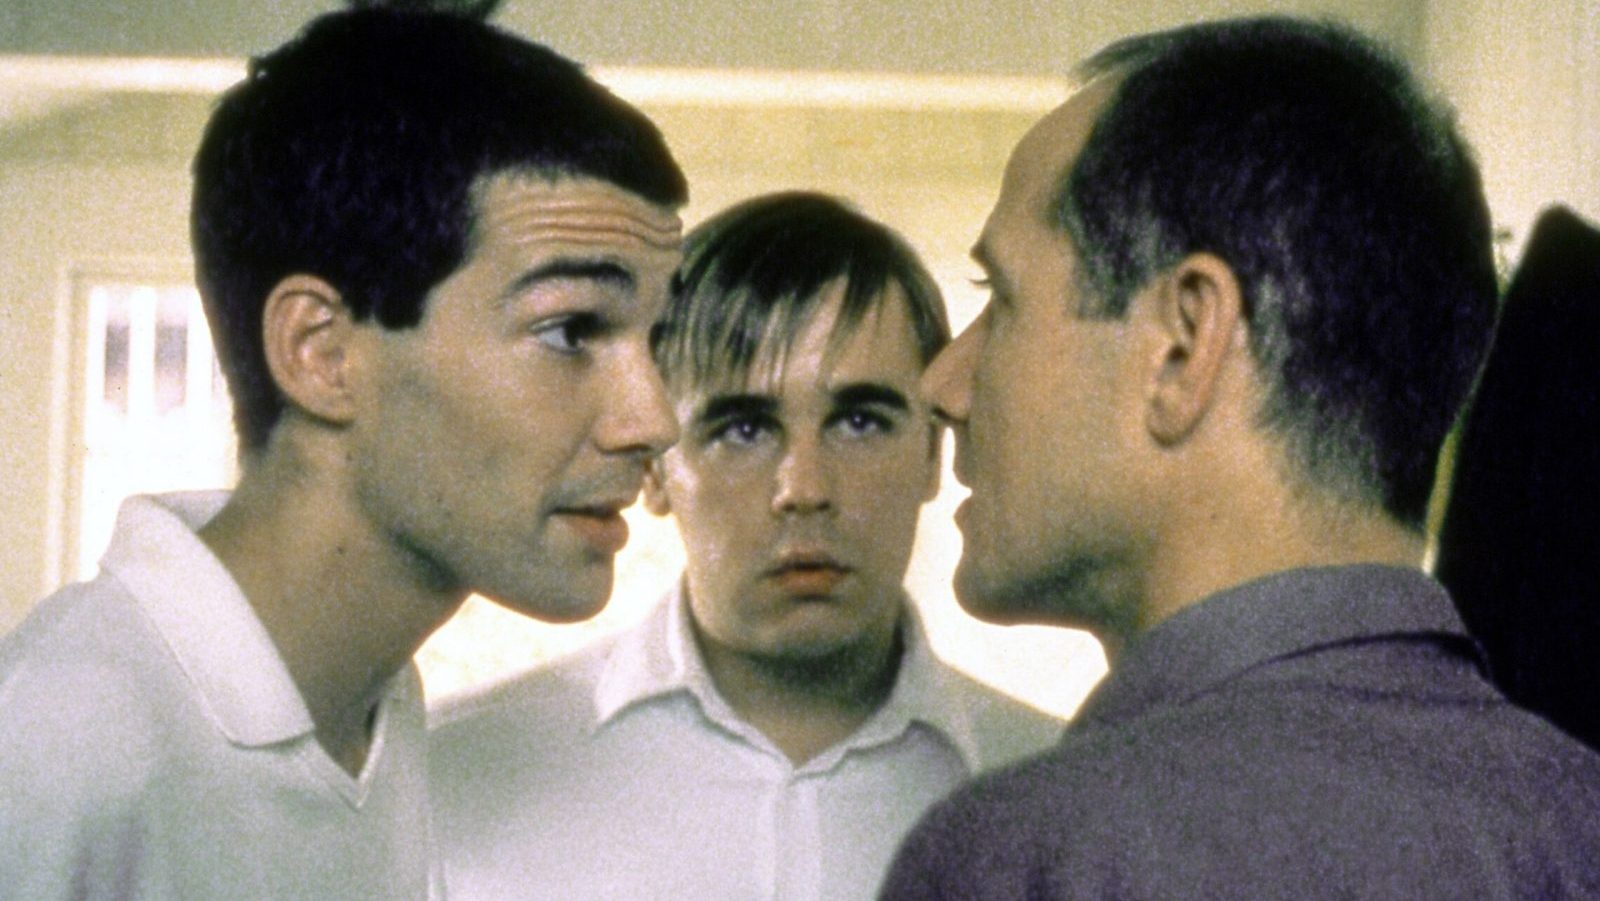 <p><span>This meta-horror classic is just as unsettling today as it was in the 90s. <em>Funny Games</em> is a horror flick that makes the audience an accomplice in its heinous crimes. The film mocks the viewer and criticizes the horror genre for its use of violent imagery and situations.</span></p><p><span>This thought-provoking film is praised for its self-awareness and ability to create a genuinely uncomfortable viewing experience. It was released in Austria and later rebooted for American audiences in 2007.</span></p>